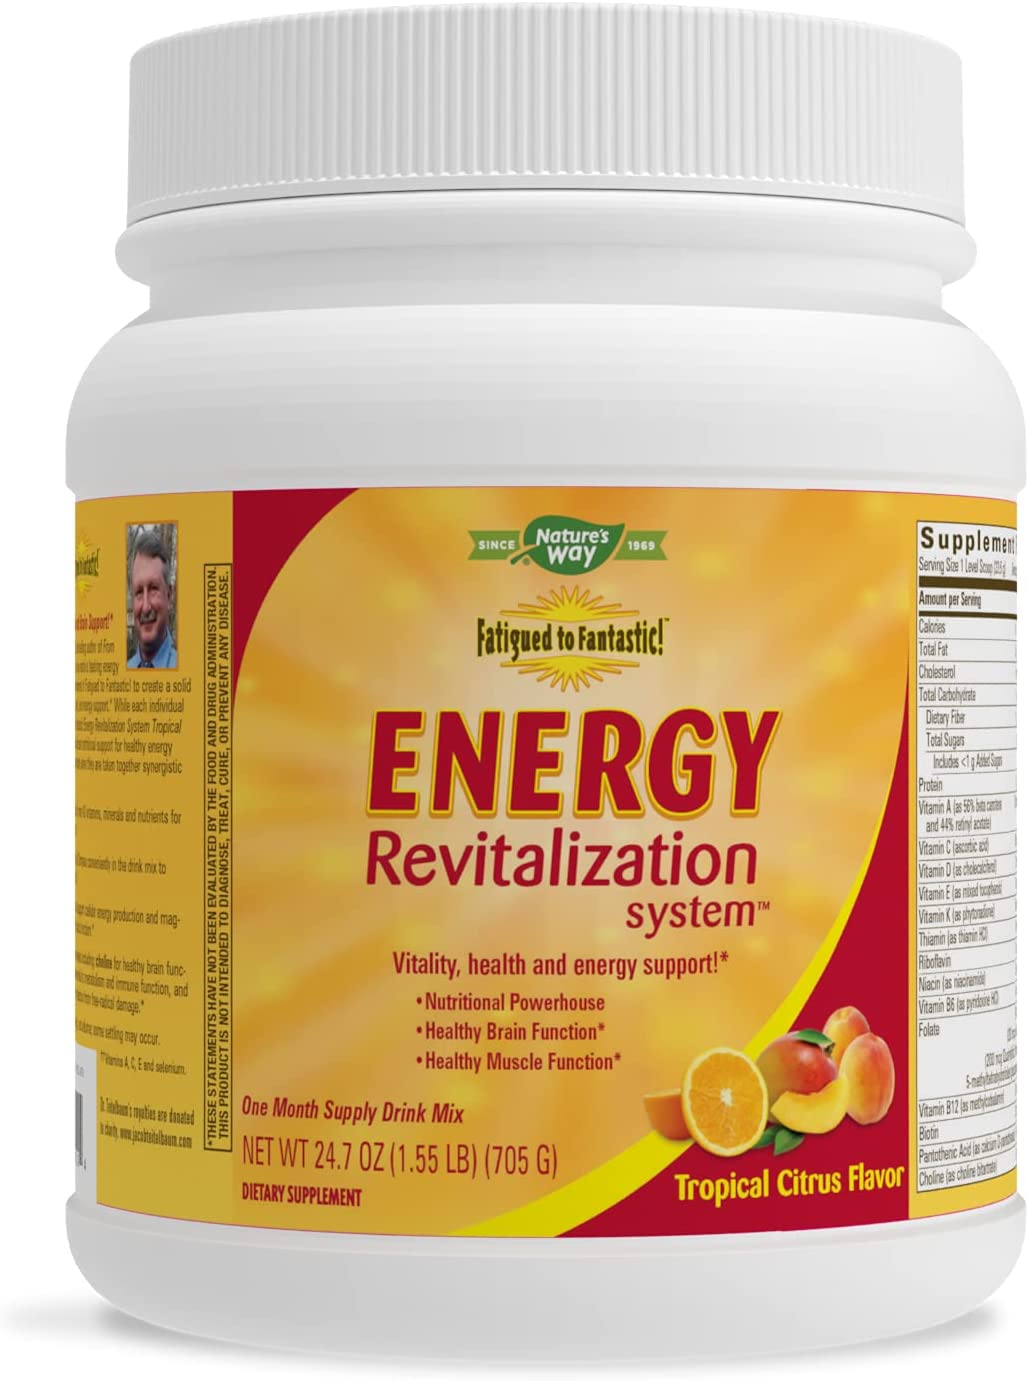 Fatigued to Fantastic Energy Citrus 30 days by Nature's Way